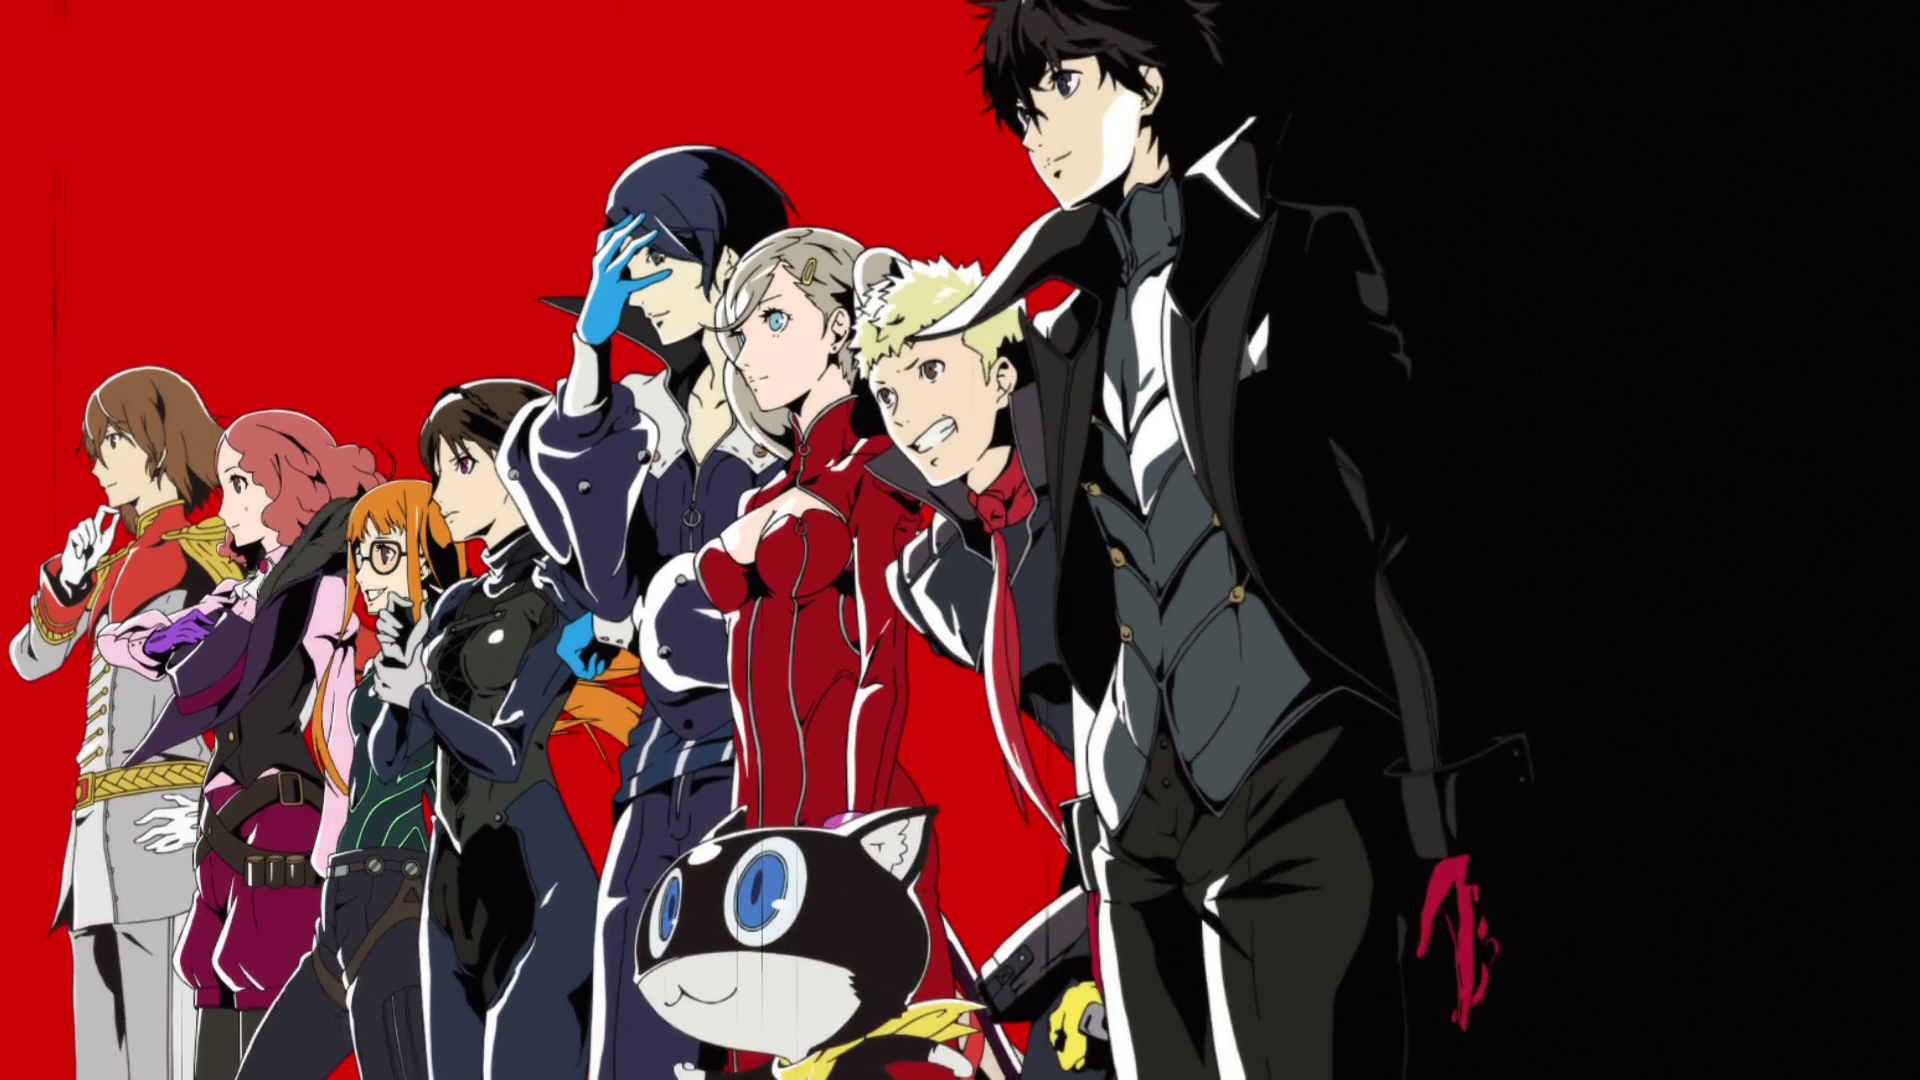 Persona 5 Royal release window confirmed for North America